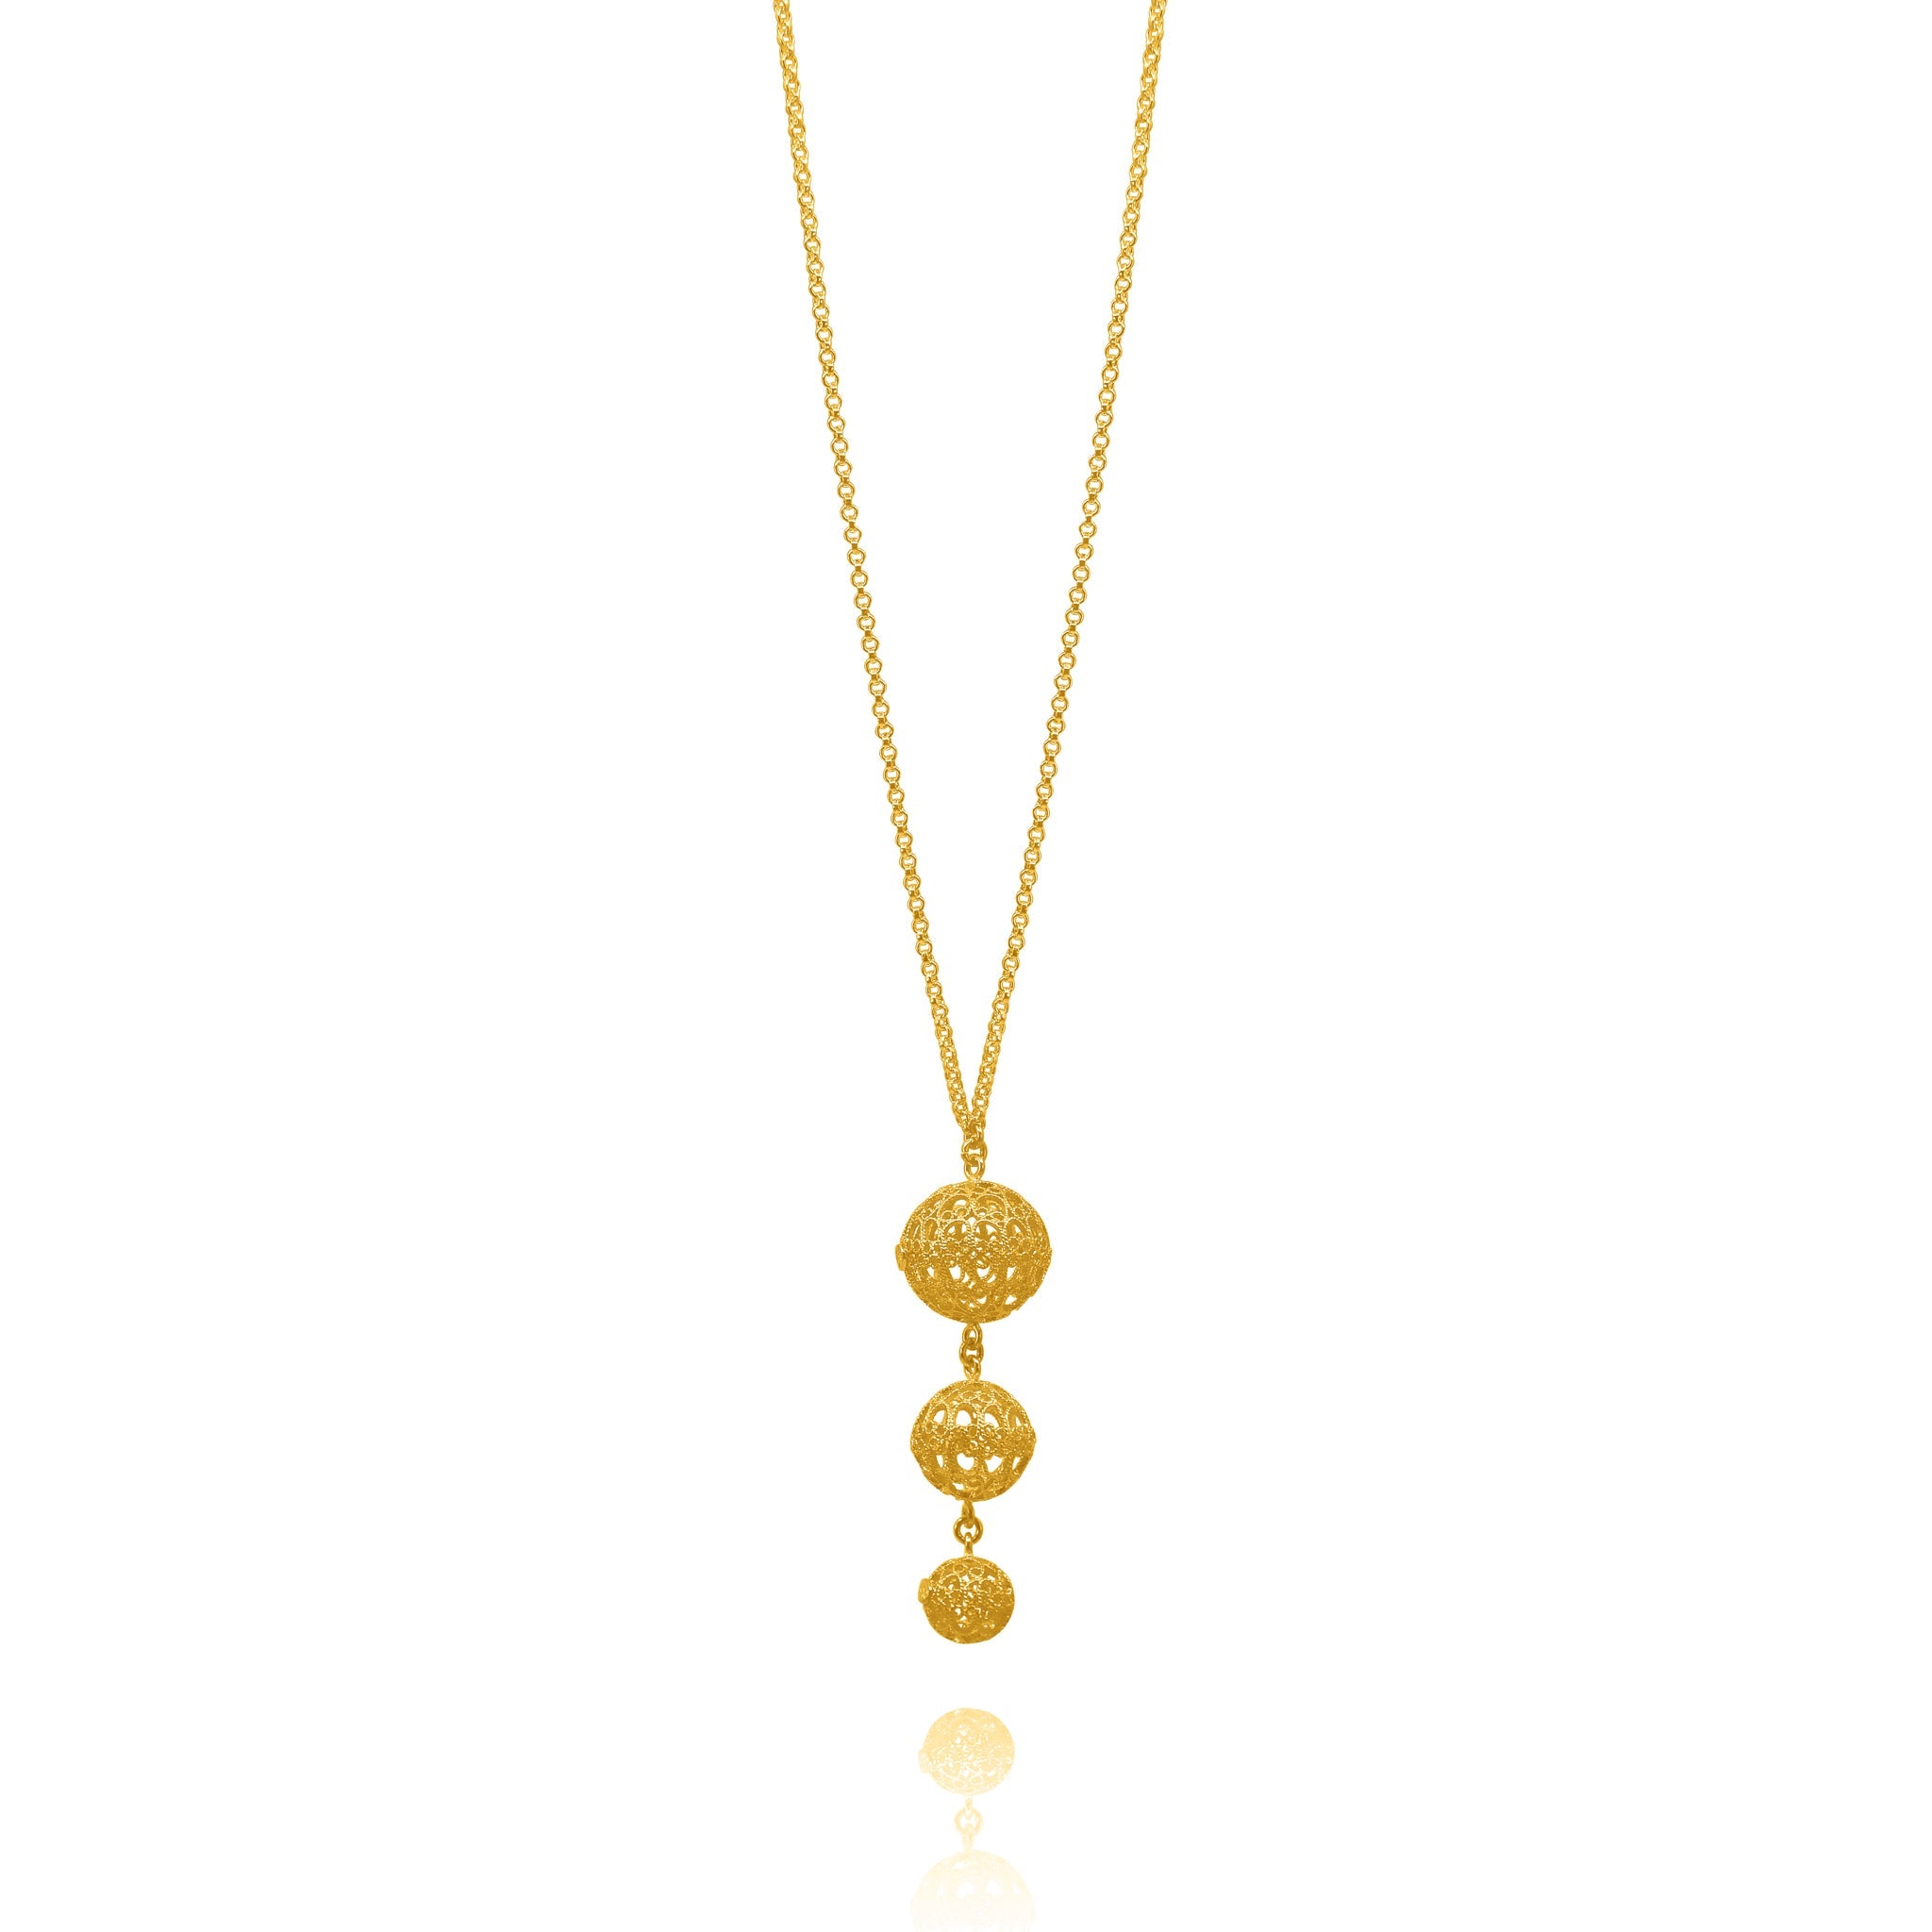 LUCRECIA GOLD LONG NECKLACE THREE SPHERES FILIGREE